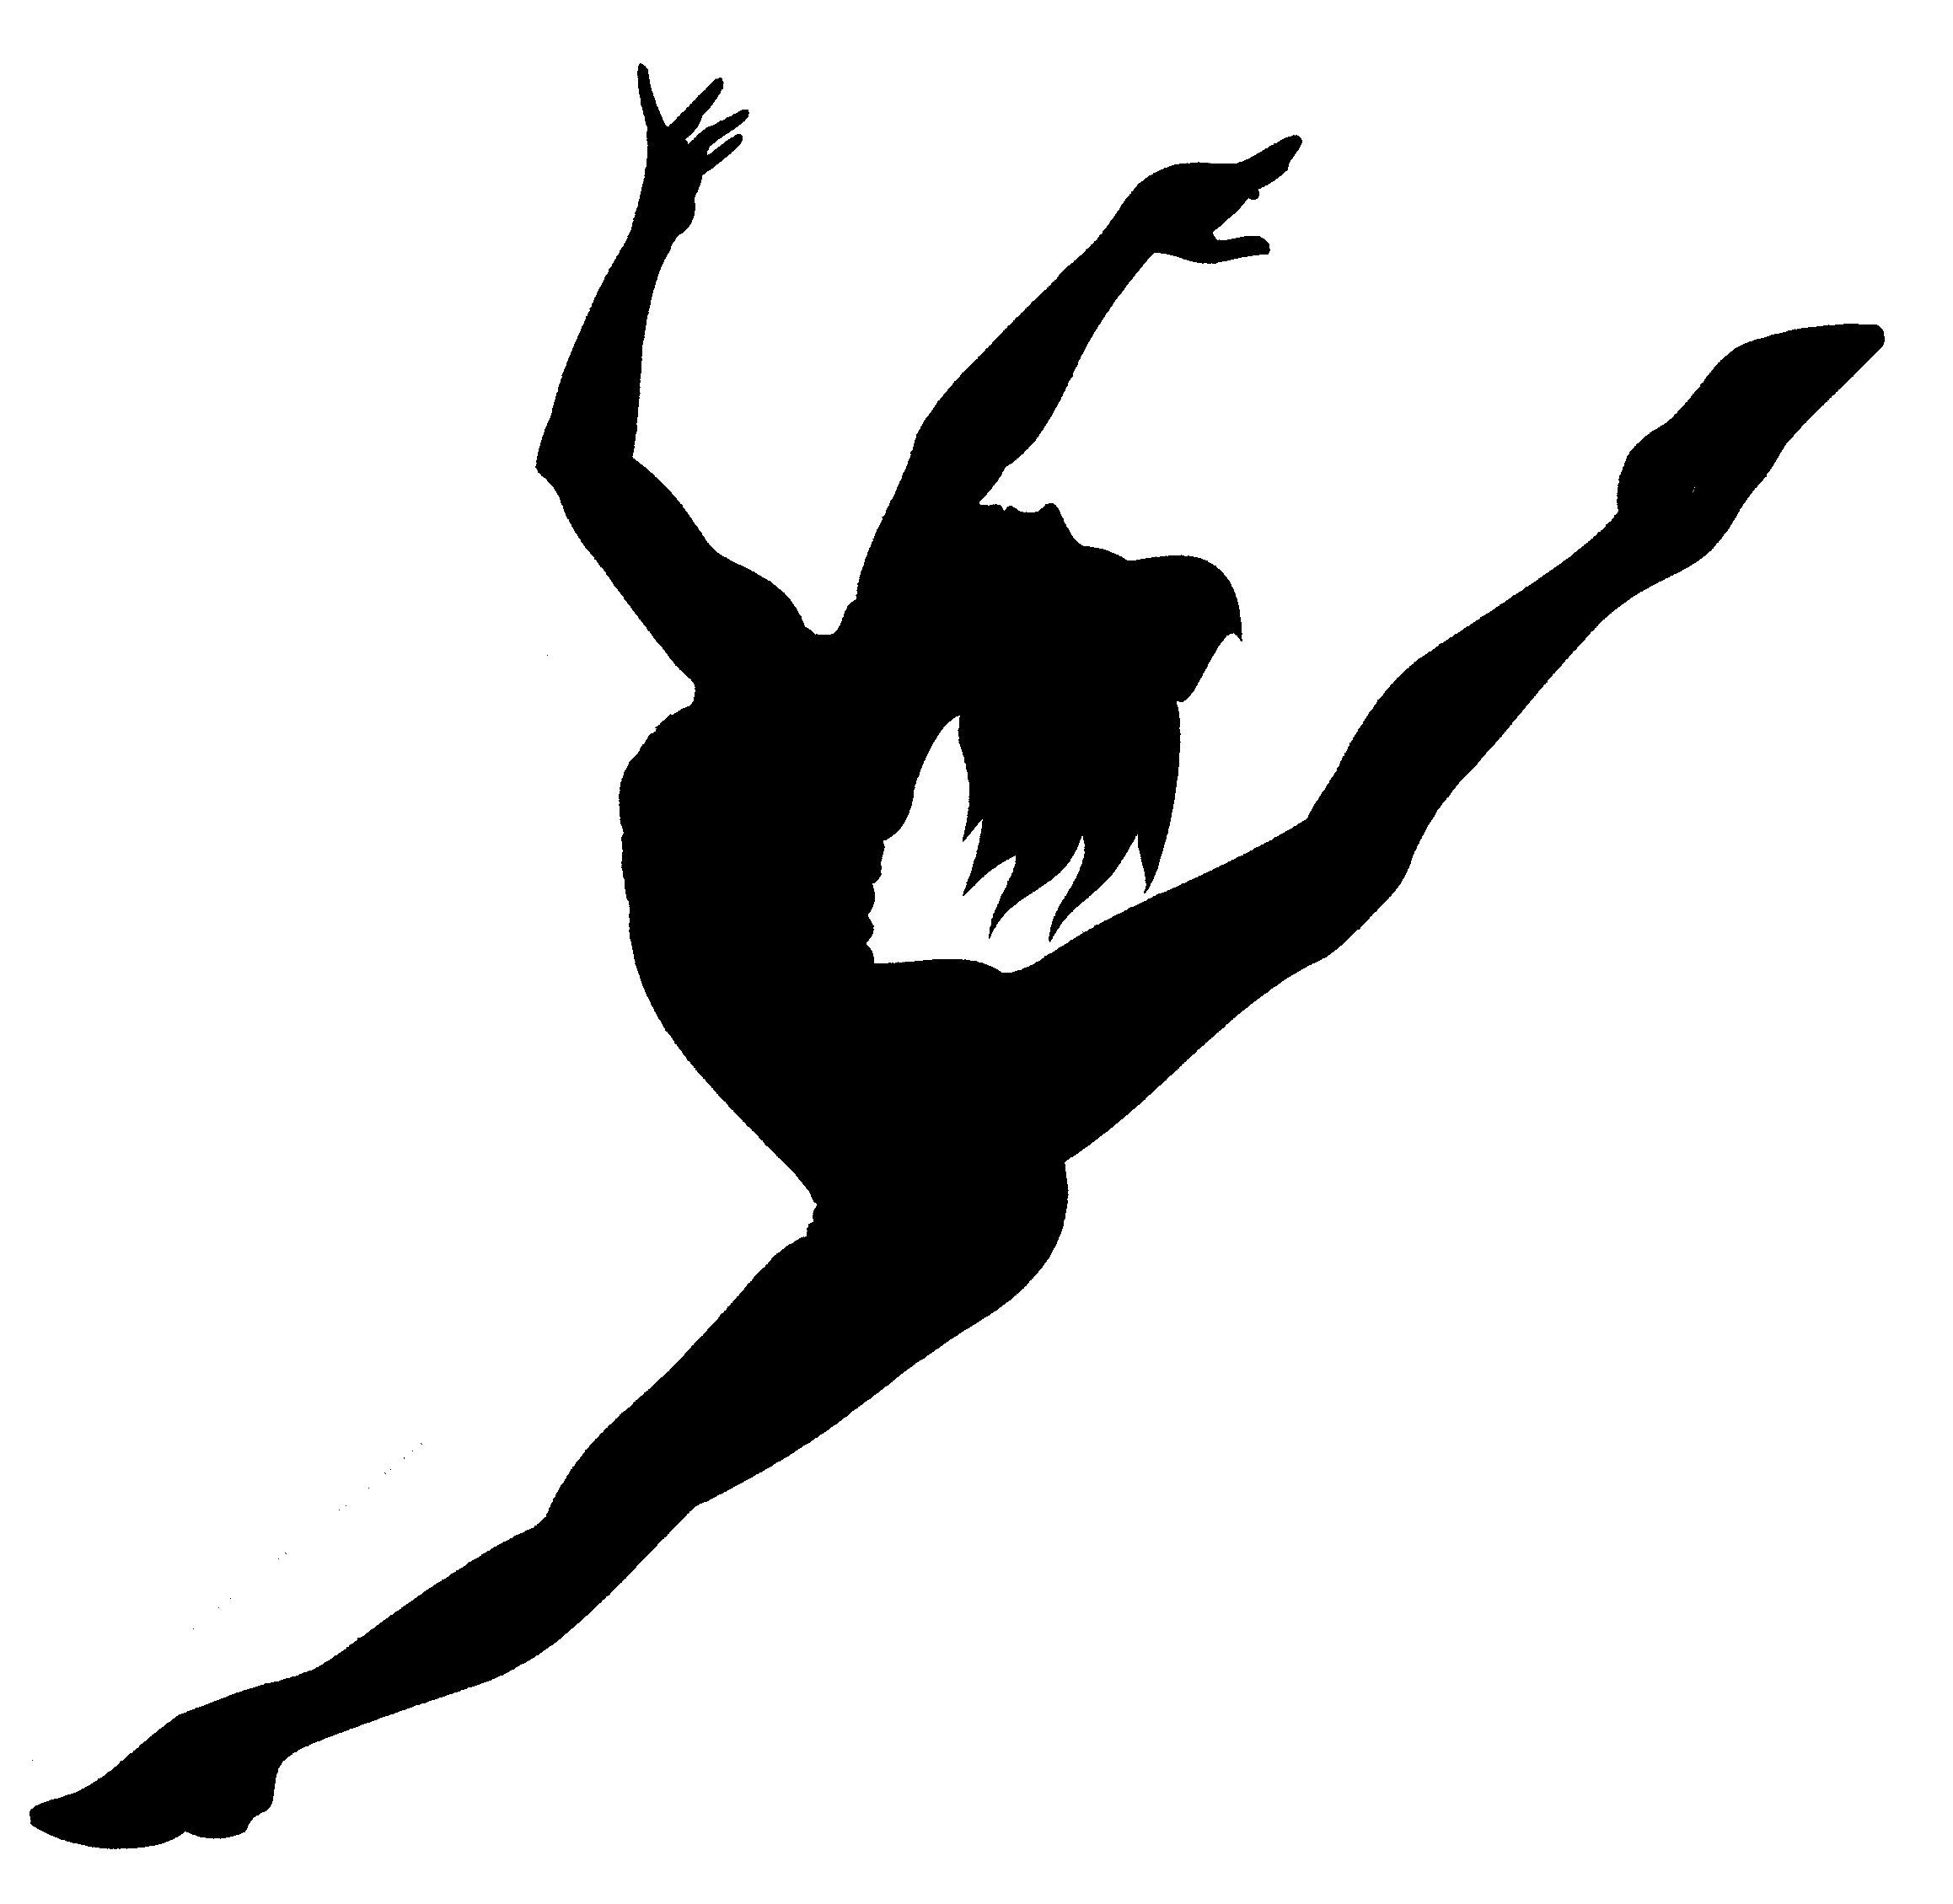 Dancer Jumping Silhouette | Clipart Panda - Free Clipart Images